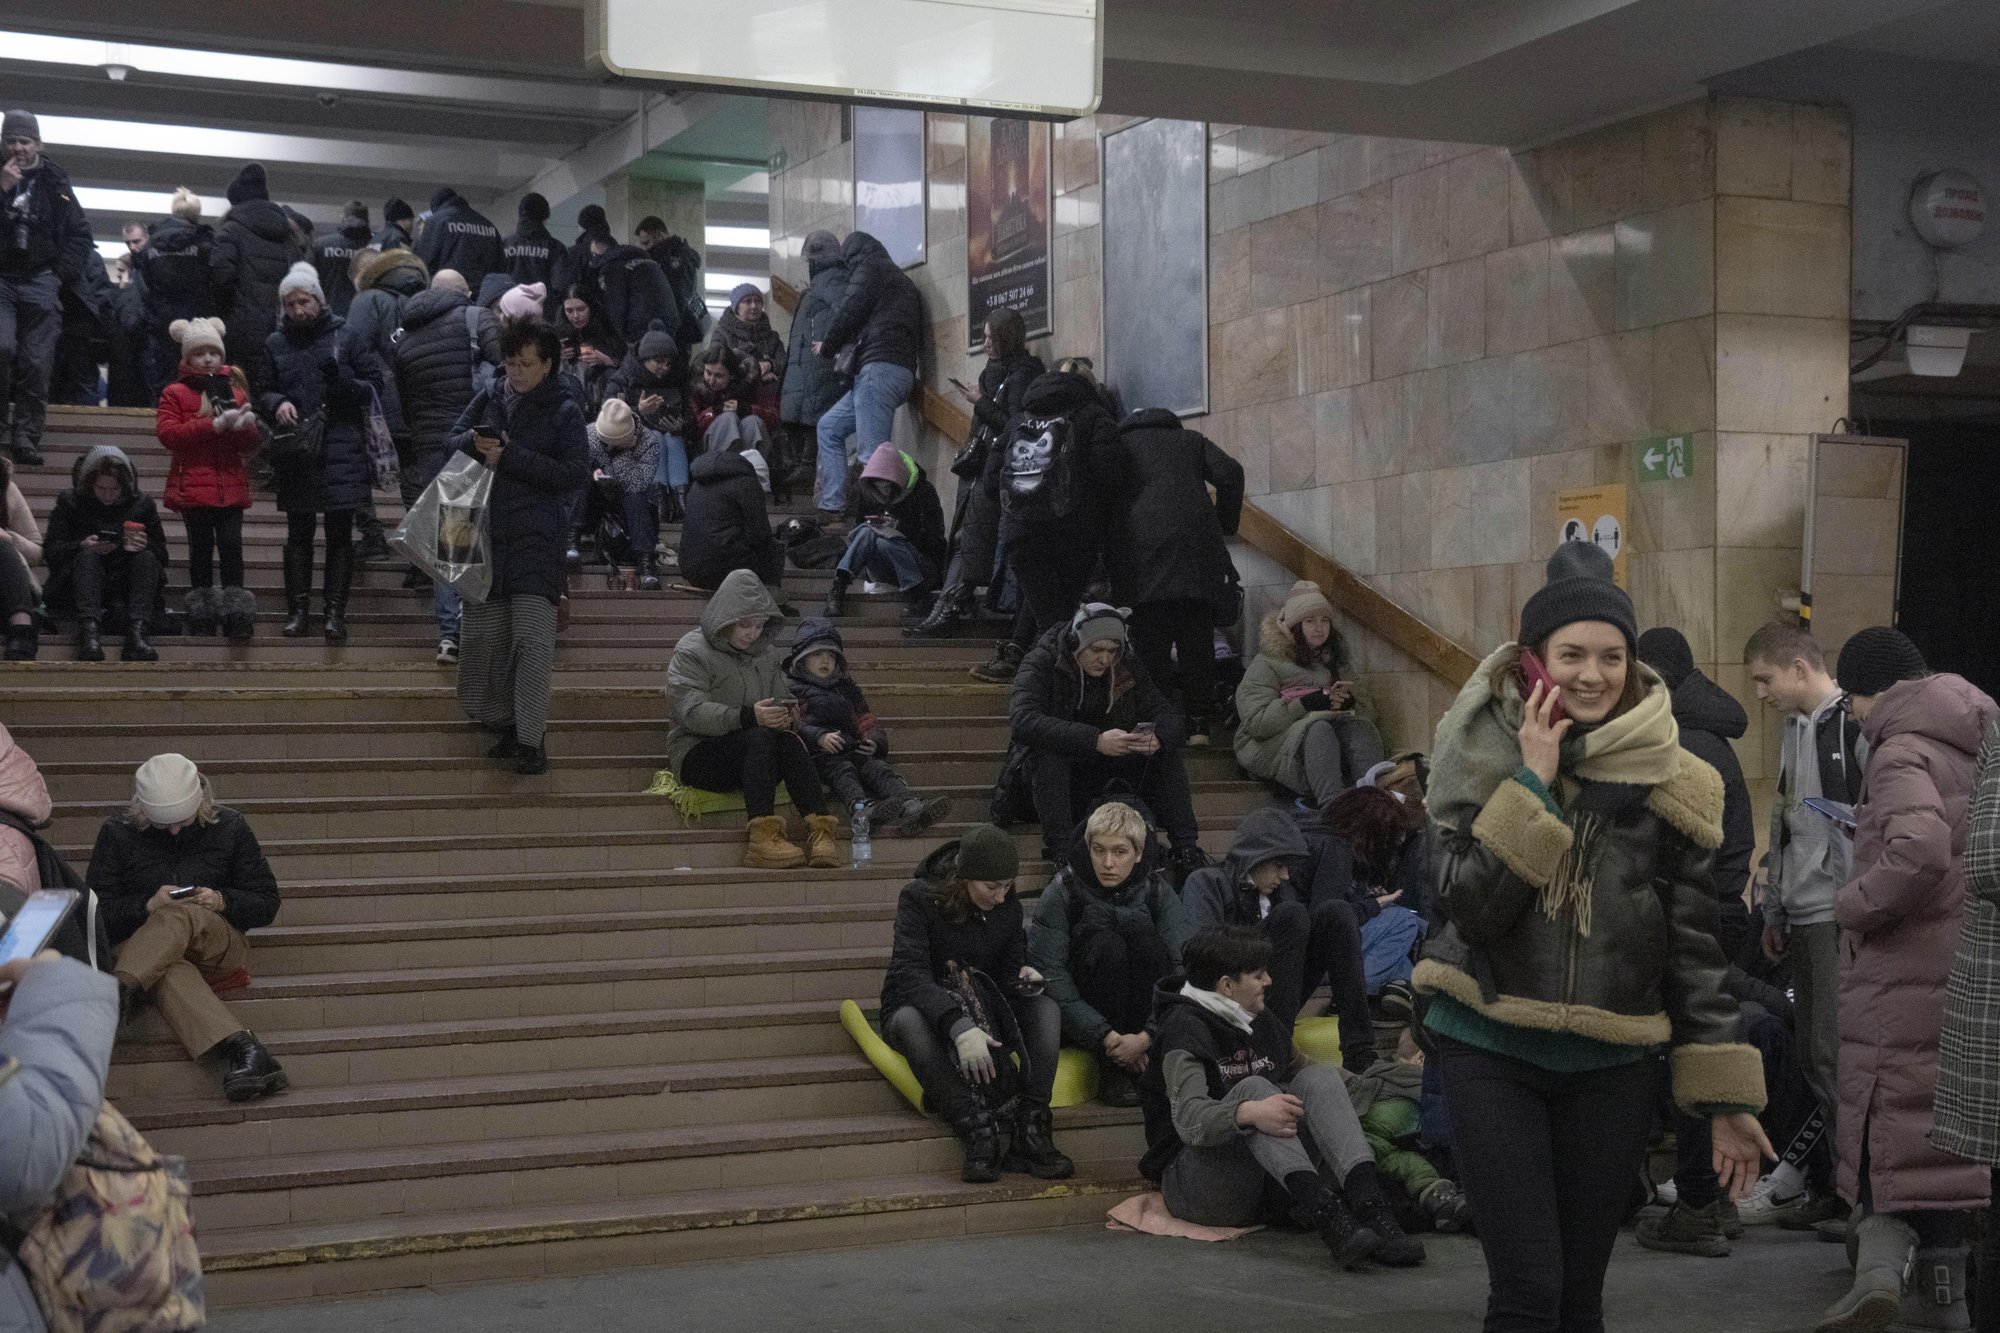 People gather in a subway station being used as a bomb shelter during a Russian rocket attack in Kyiv, Ukraine, Friday, Feb. 10, 2023. (AP Photo/Efrem Lukatsky)